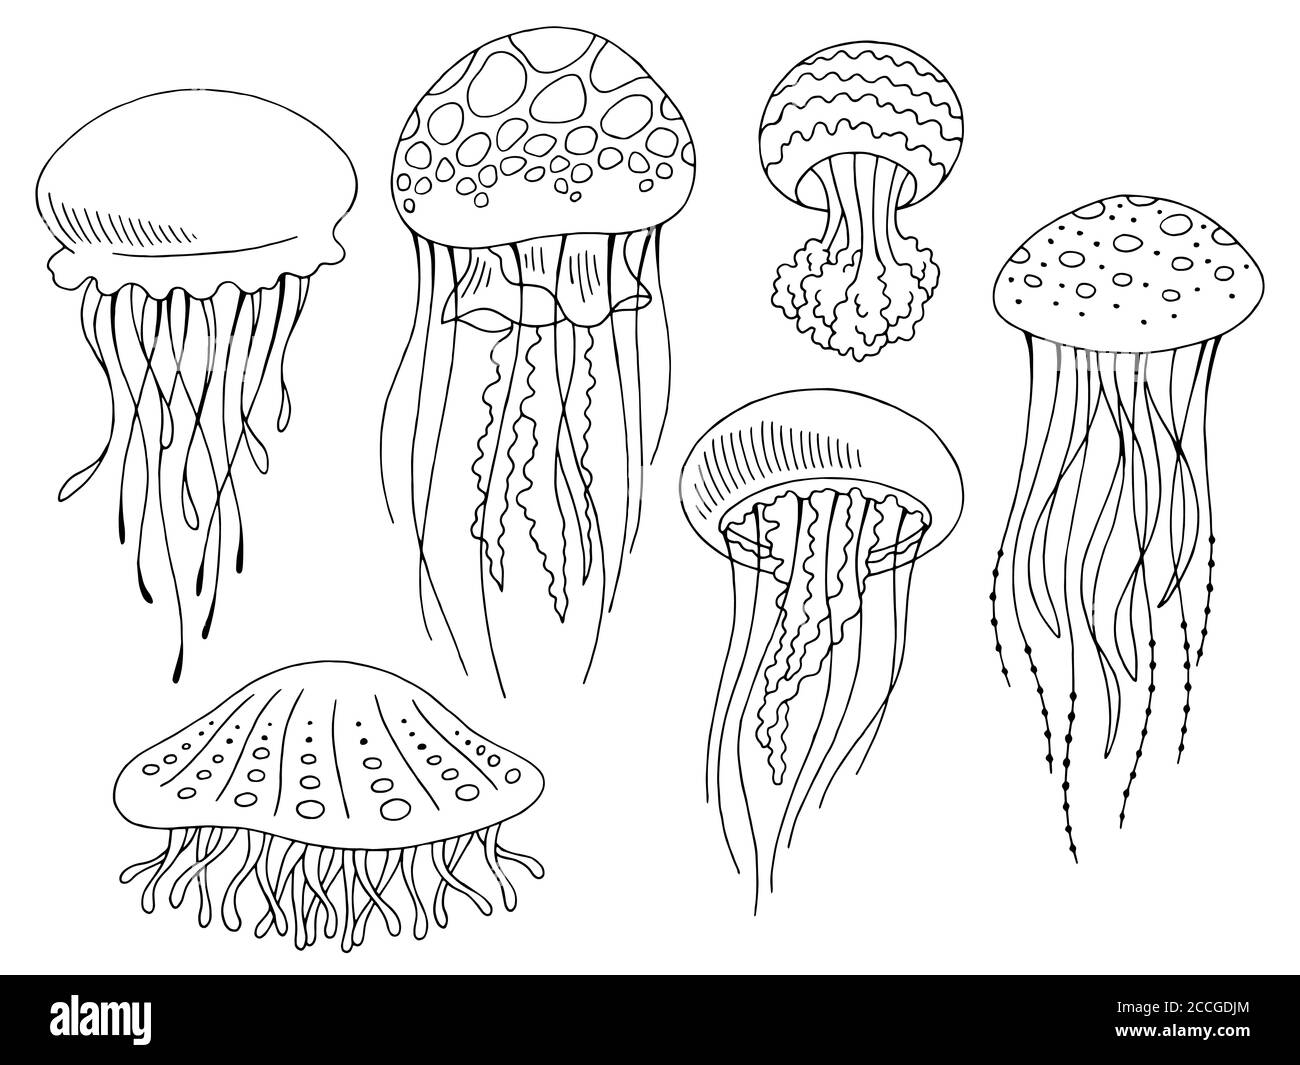 Jellyfish graphic set black white isolated sketch illustration vector Stock Vector